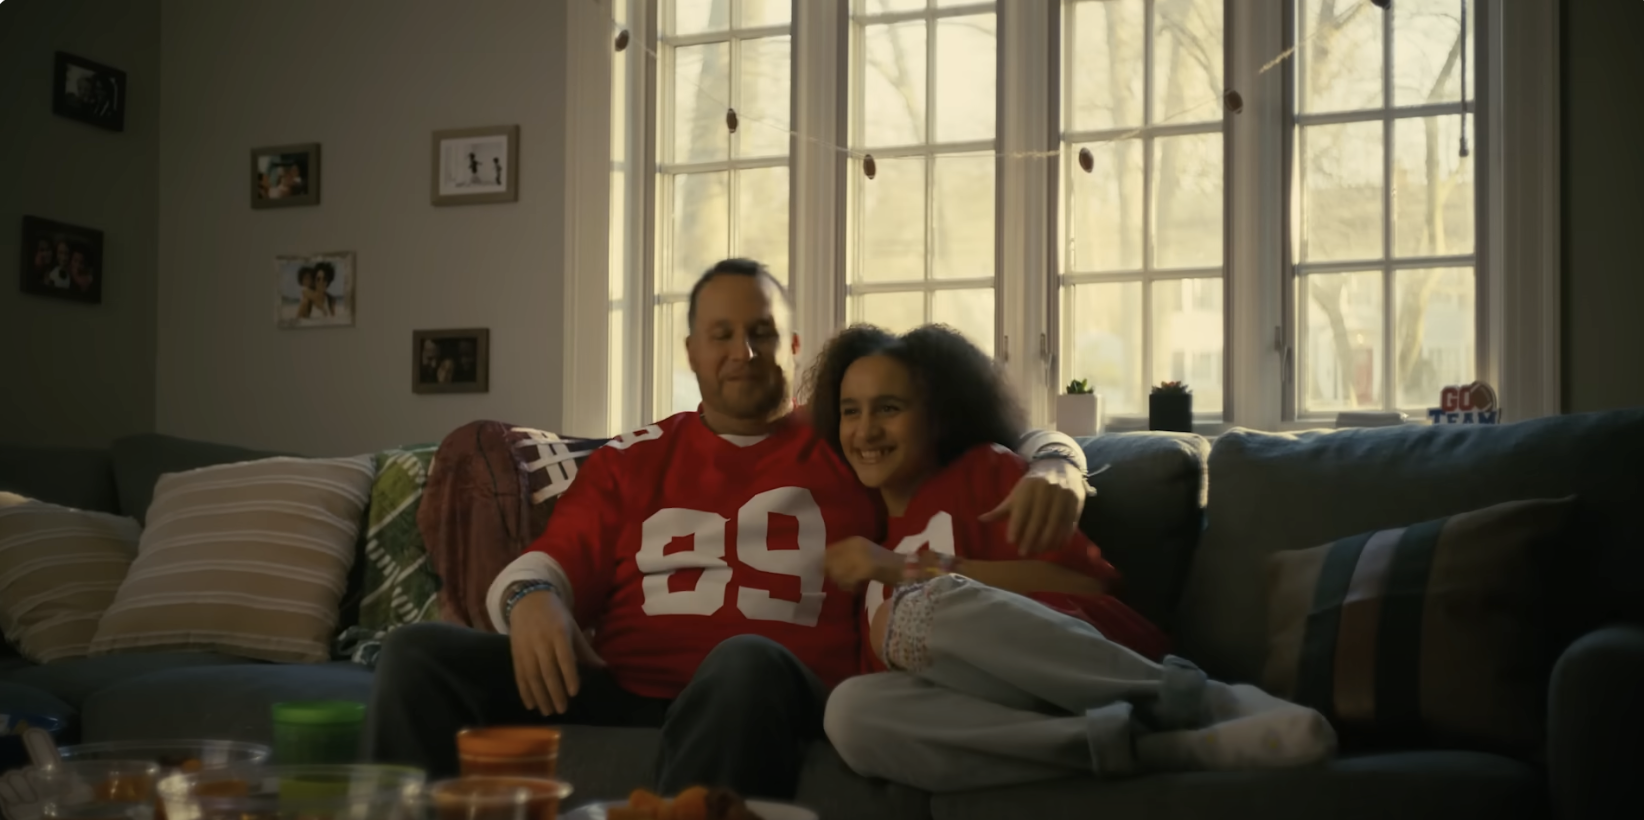 A Cetaphil Commercial About Swifties and Football Dads Is Dividing the Internet